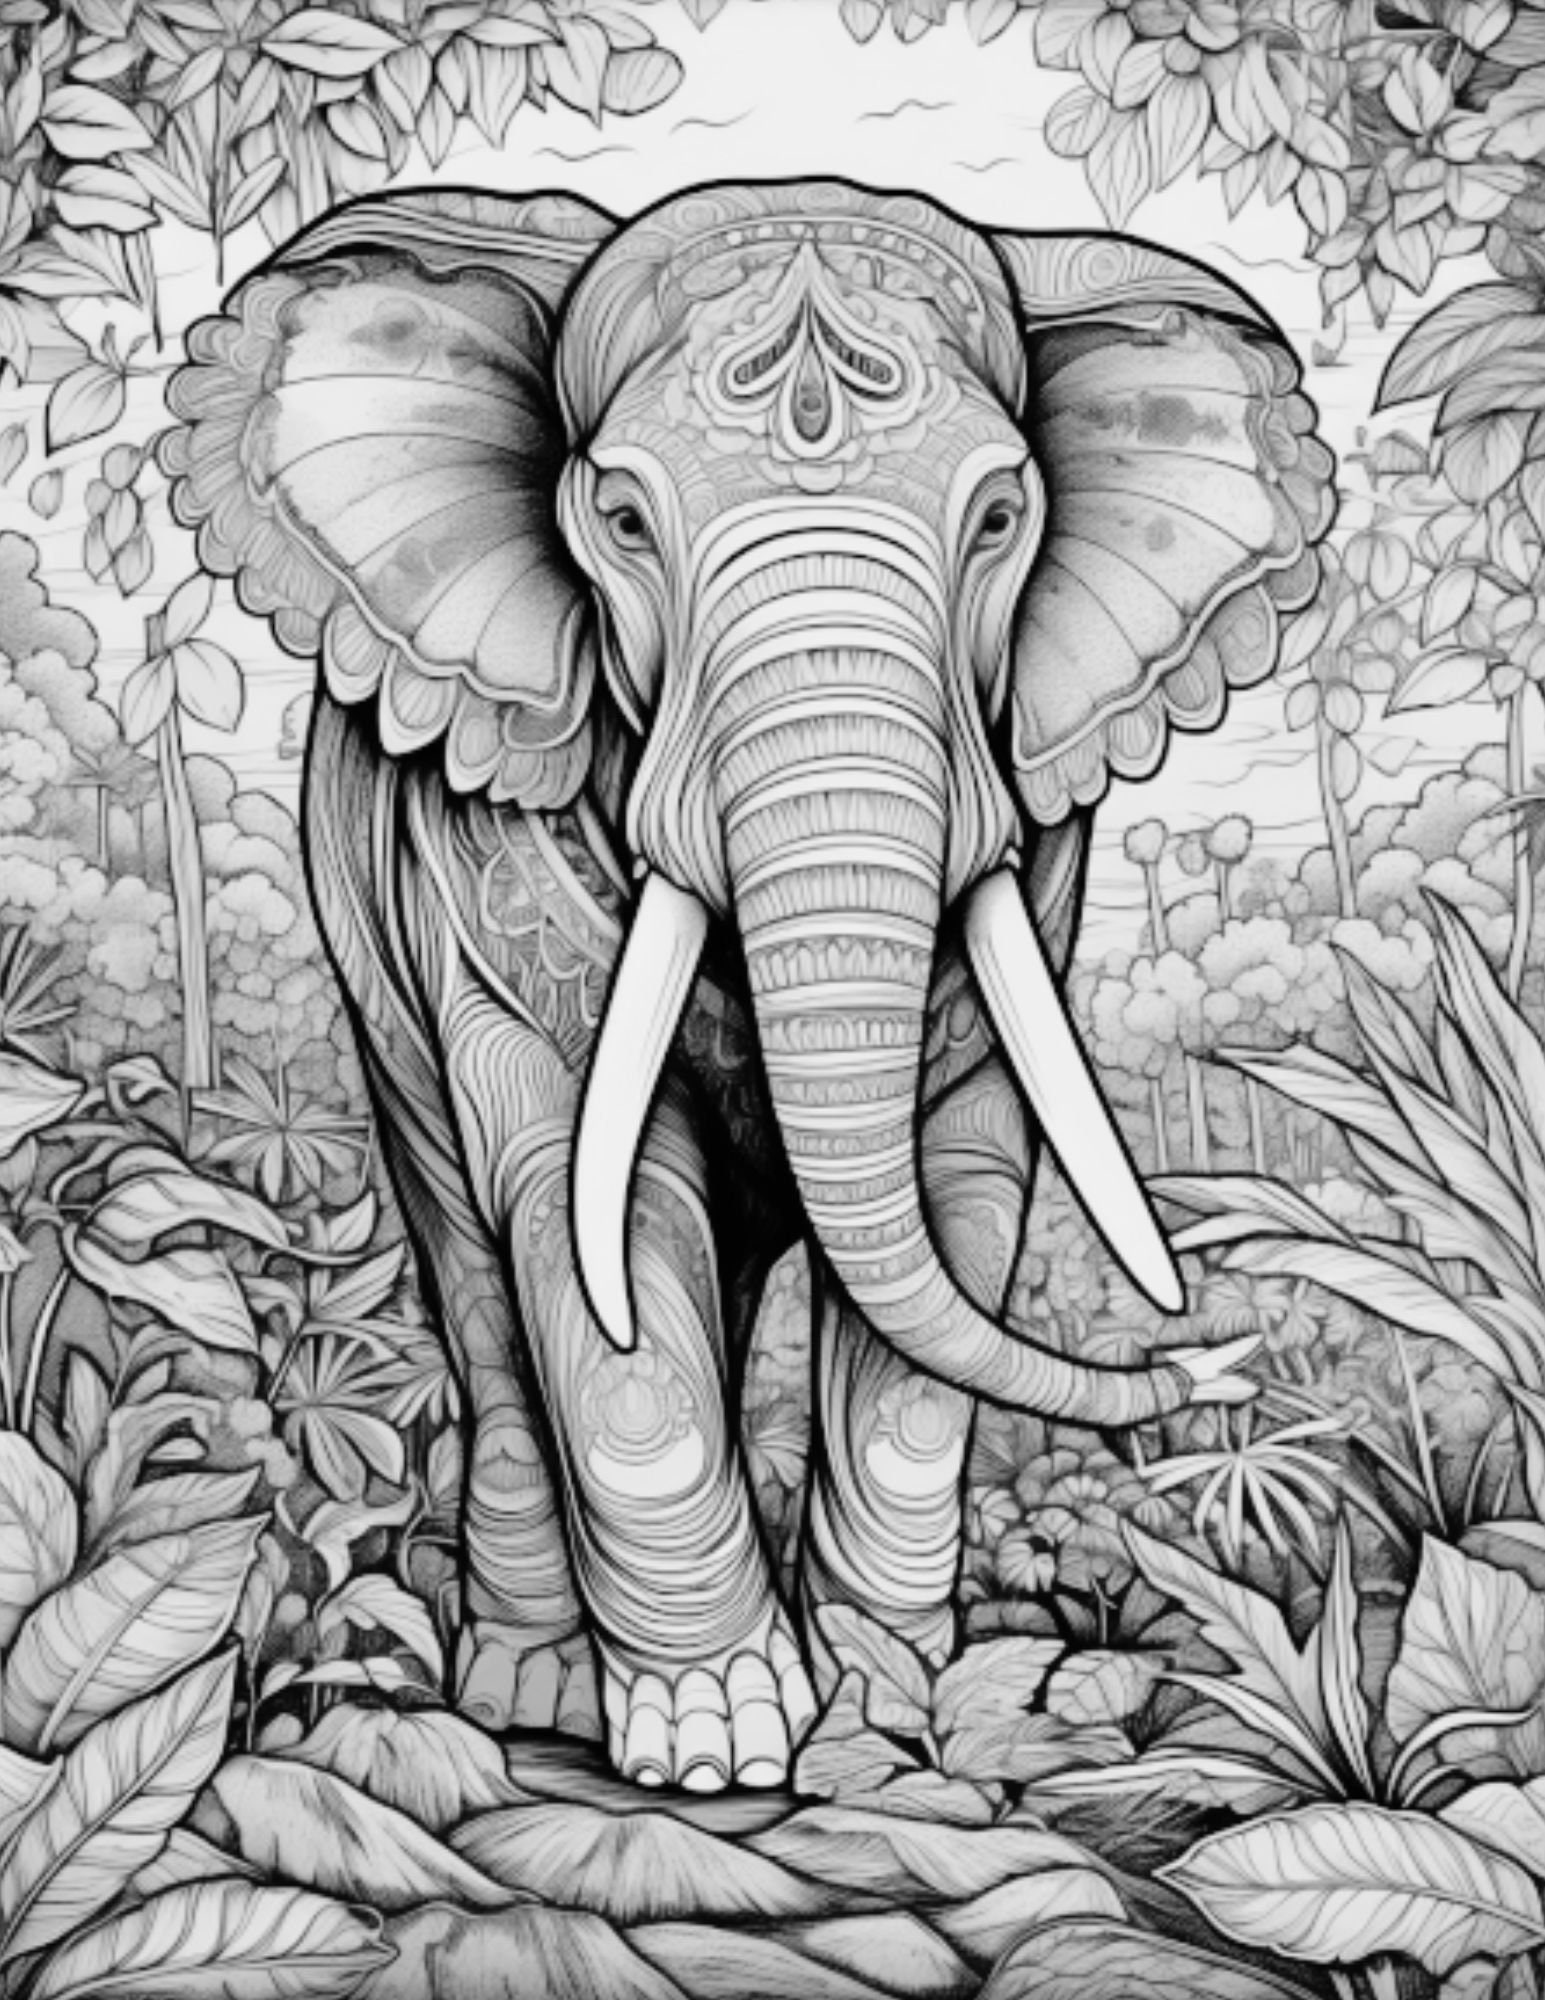 Cute Mandala Baby Elephants Coloring Book Printable Coloring Page for Adult  Coloring Book Digital Download Grayscale Coloring Page 